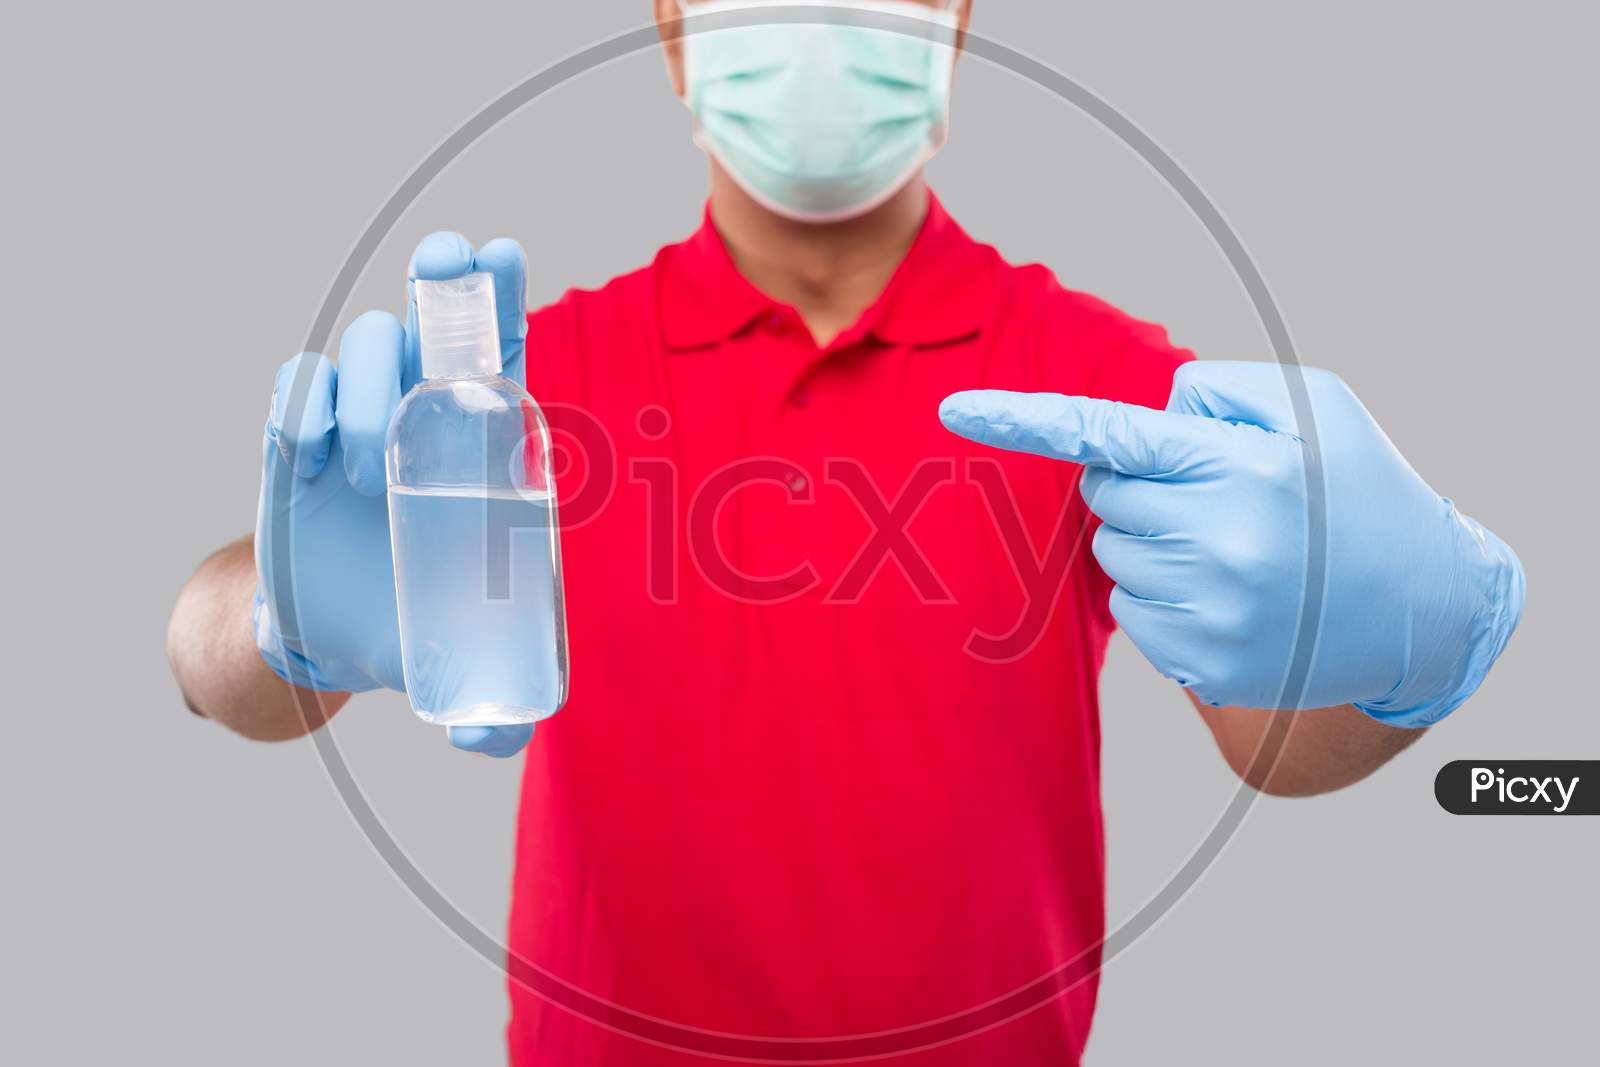 Delivery Man Ponting At Hands Sanitizer Wearing Medical Mask And Gloves Isolated. Indian Delivery Boy Holding Hand Antiseptic Close Up